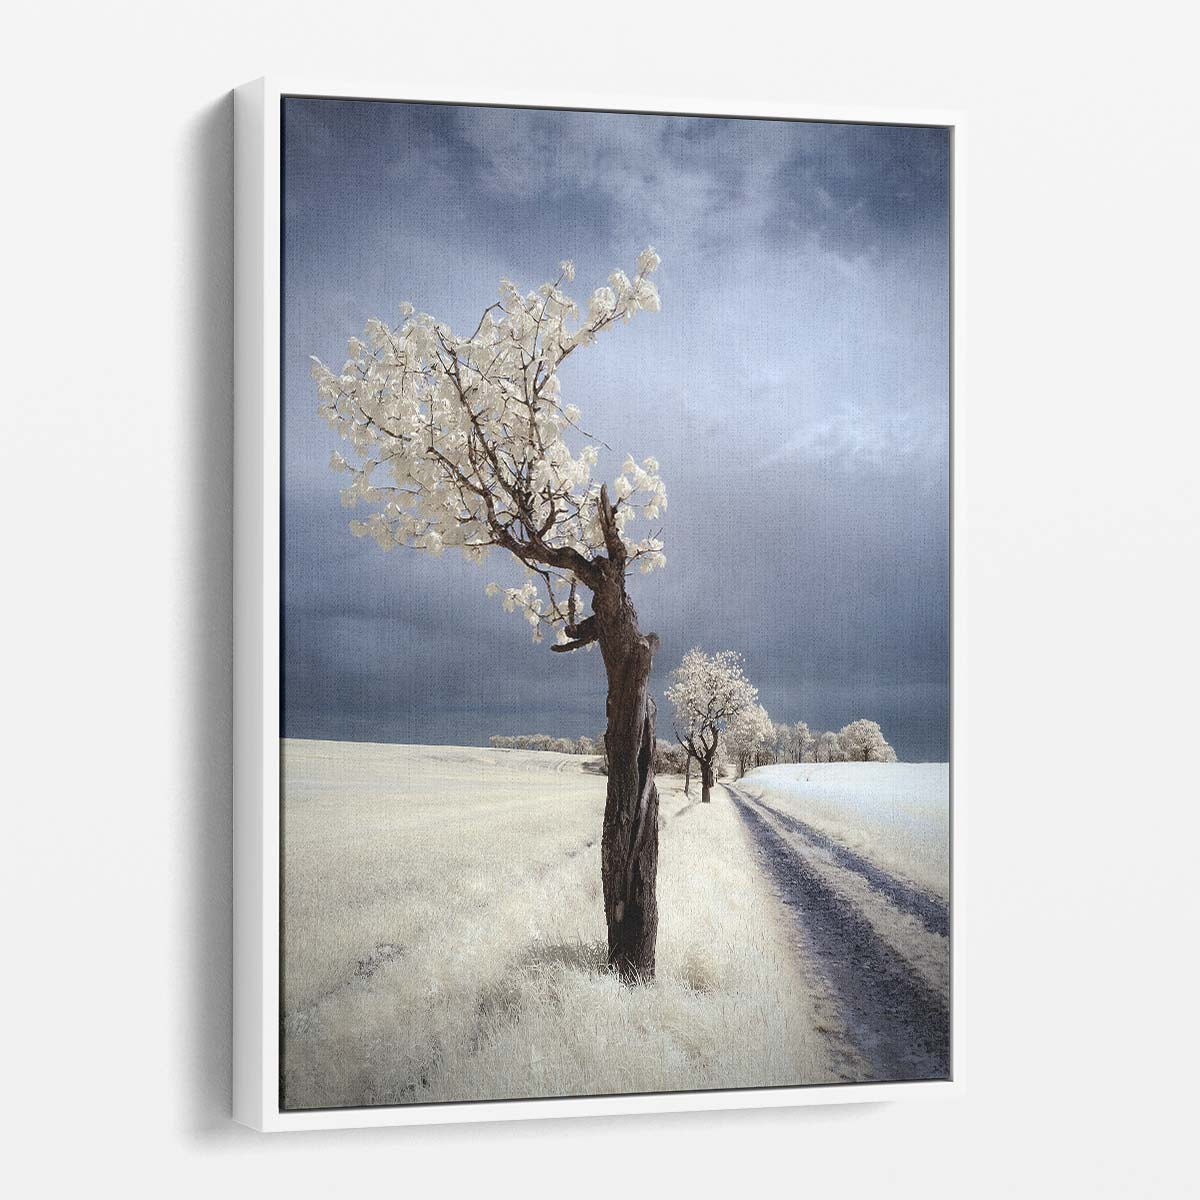 Infrared Photography White Tree Road Landscape, Lower Silesia Poland by Luxuriance Designs, made in USA